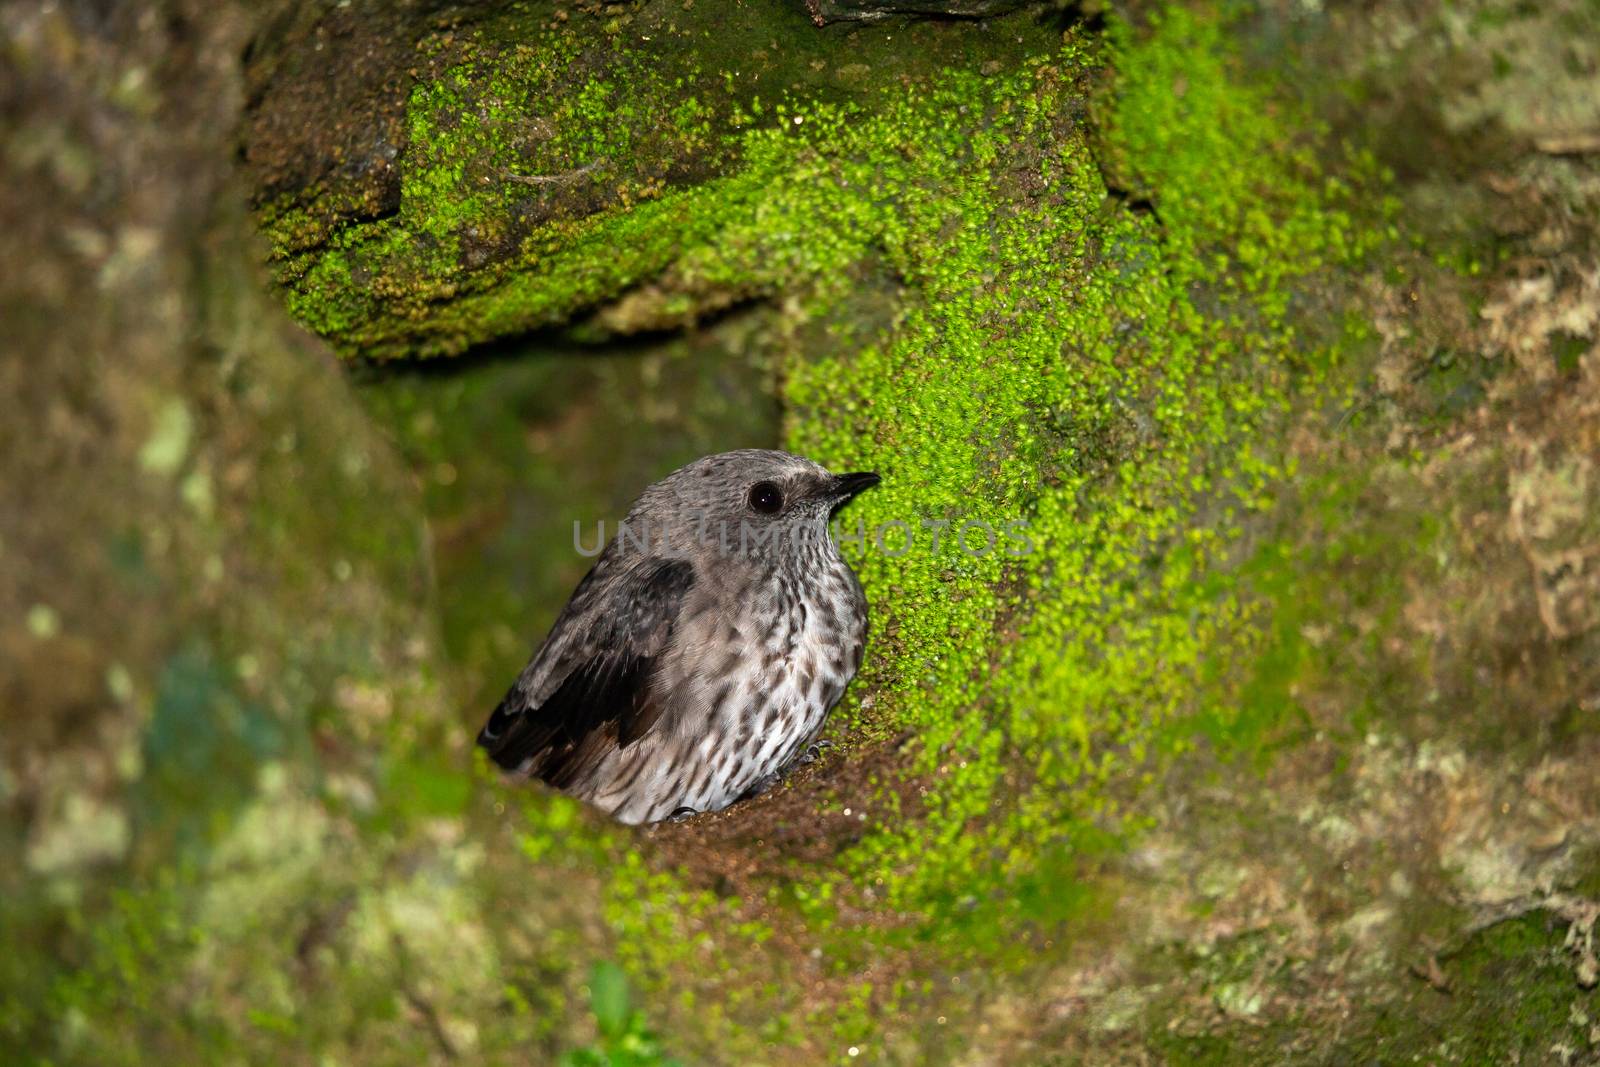 A small gray native bird in its nest.